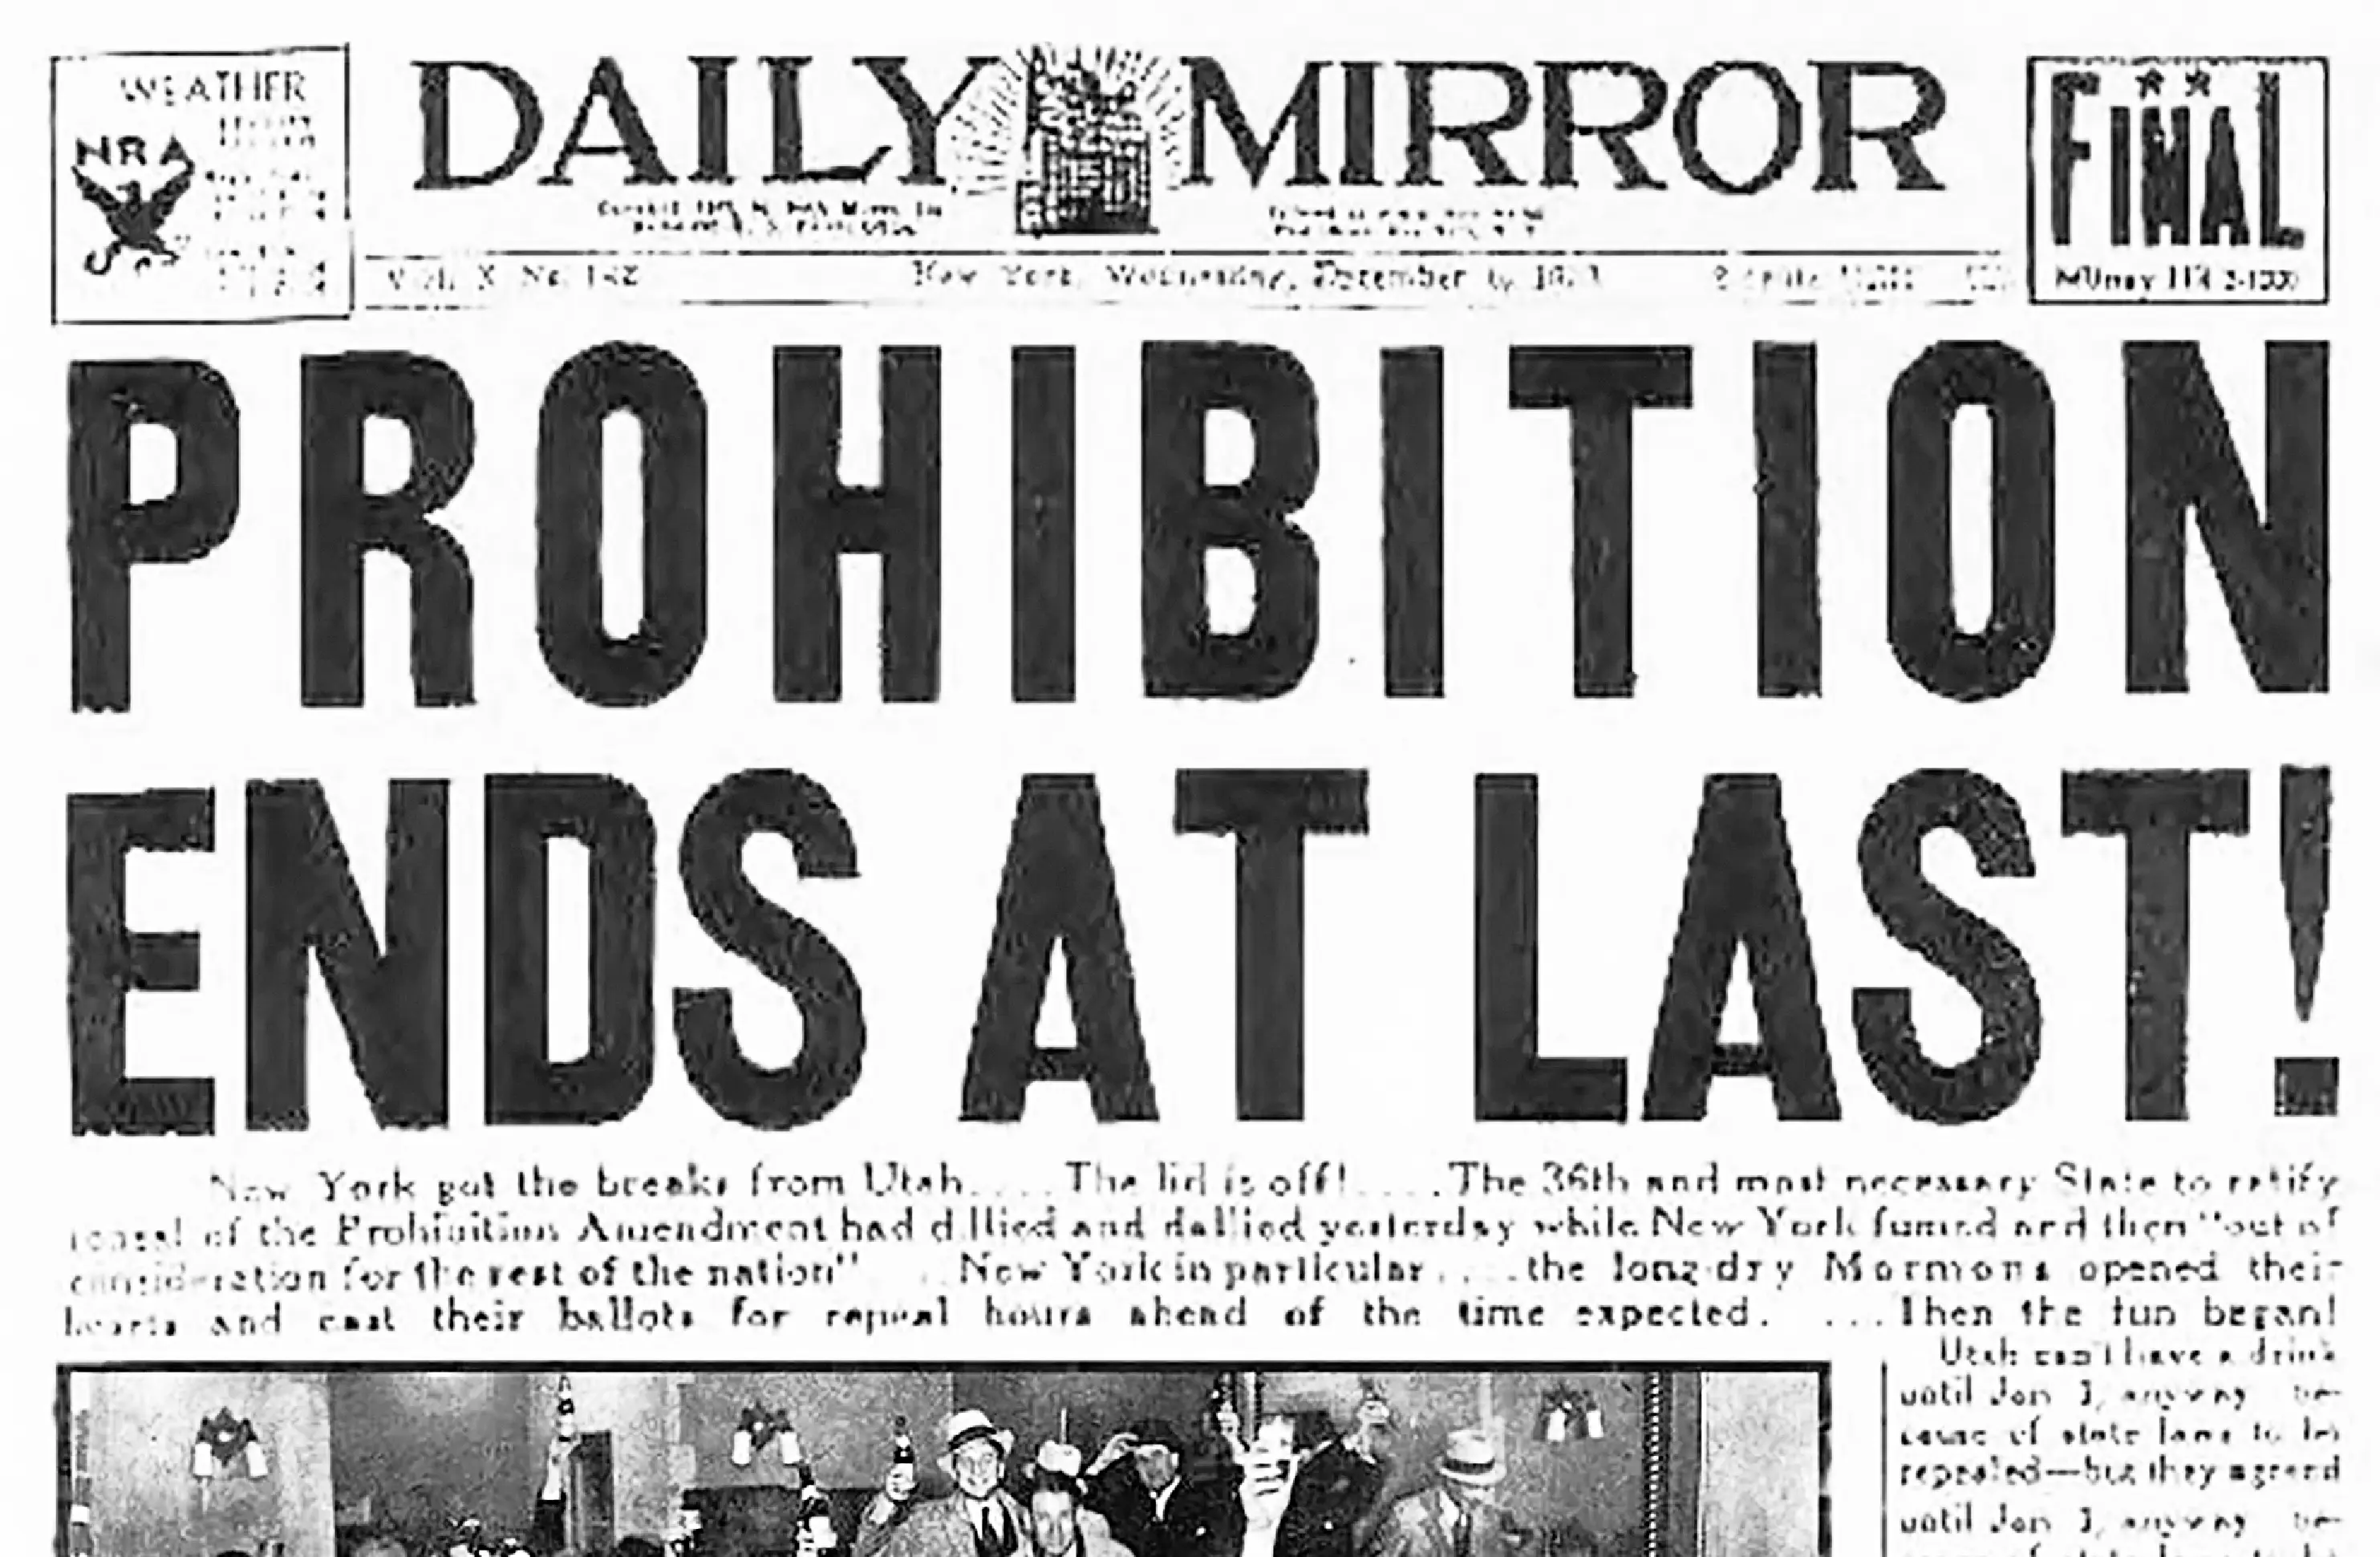 Headline from the Daily Mirror after prohibition was repealed.